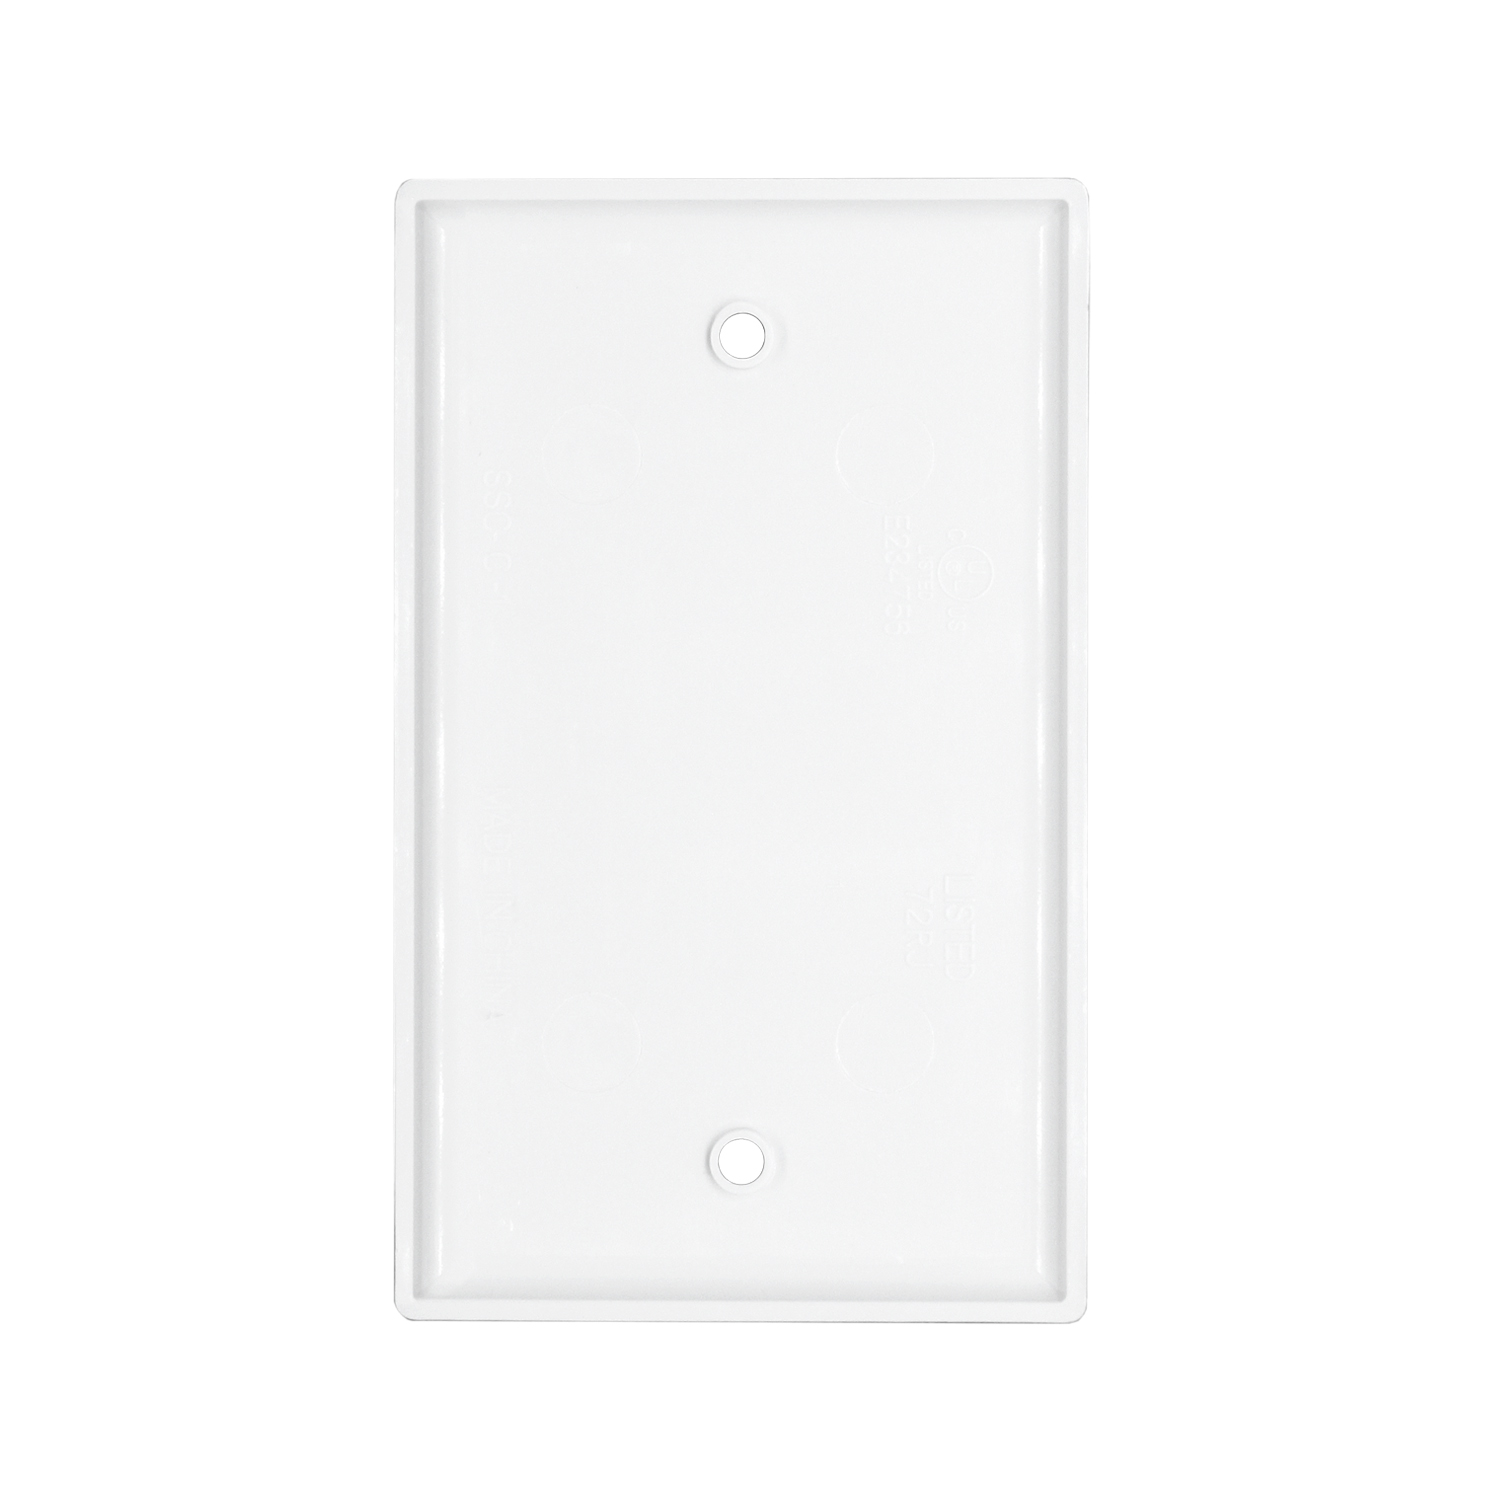 UL Listed Polycarbonate Thermoplastic 1-Gang Standard Size Blank Outlet Cover, SSC-C-1